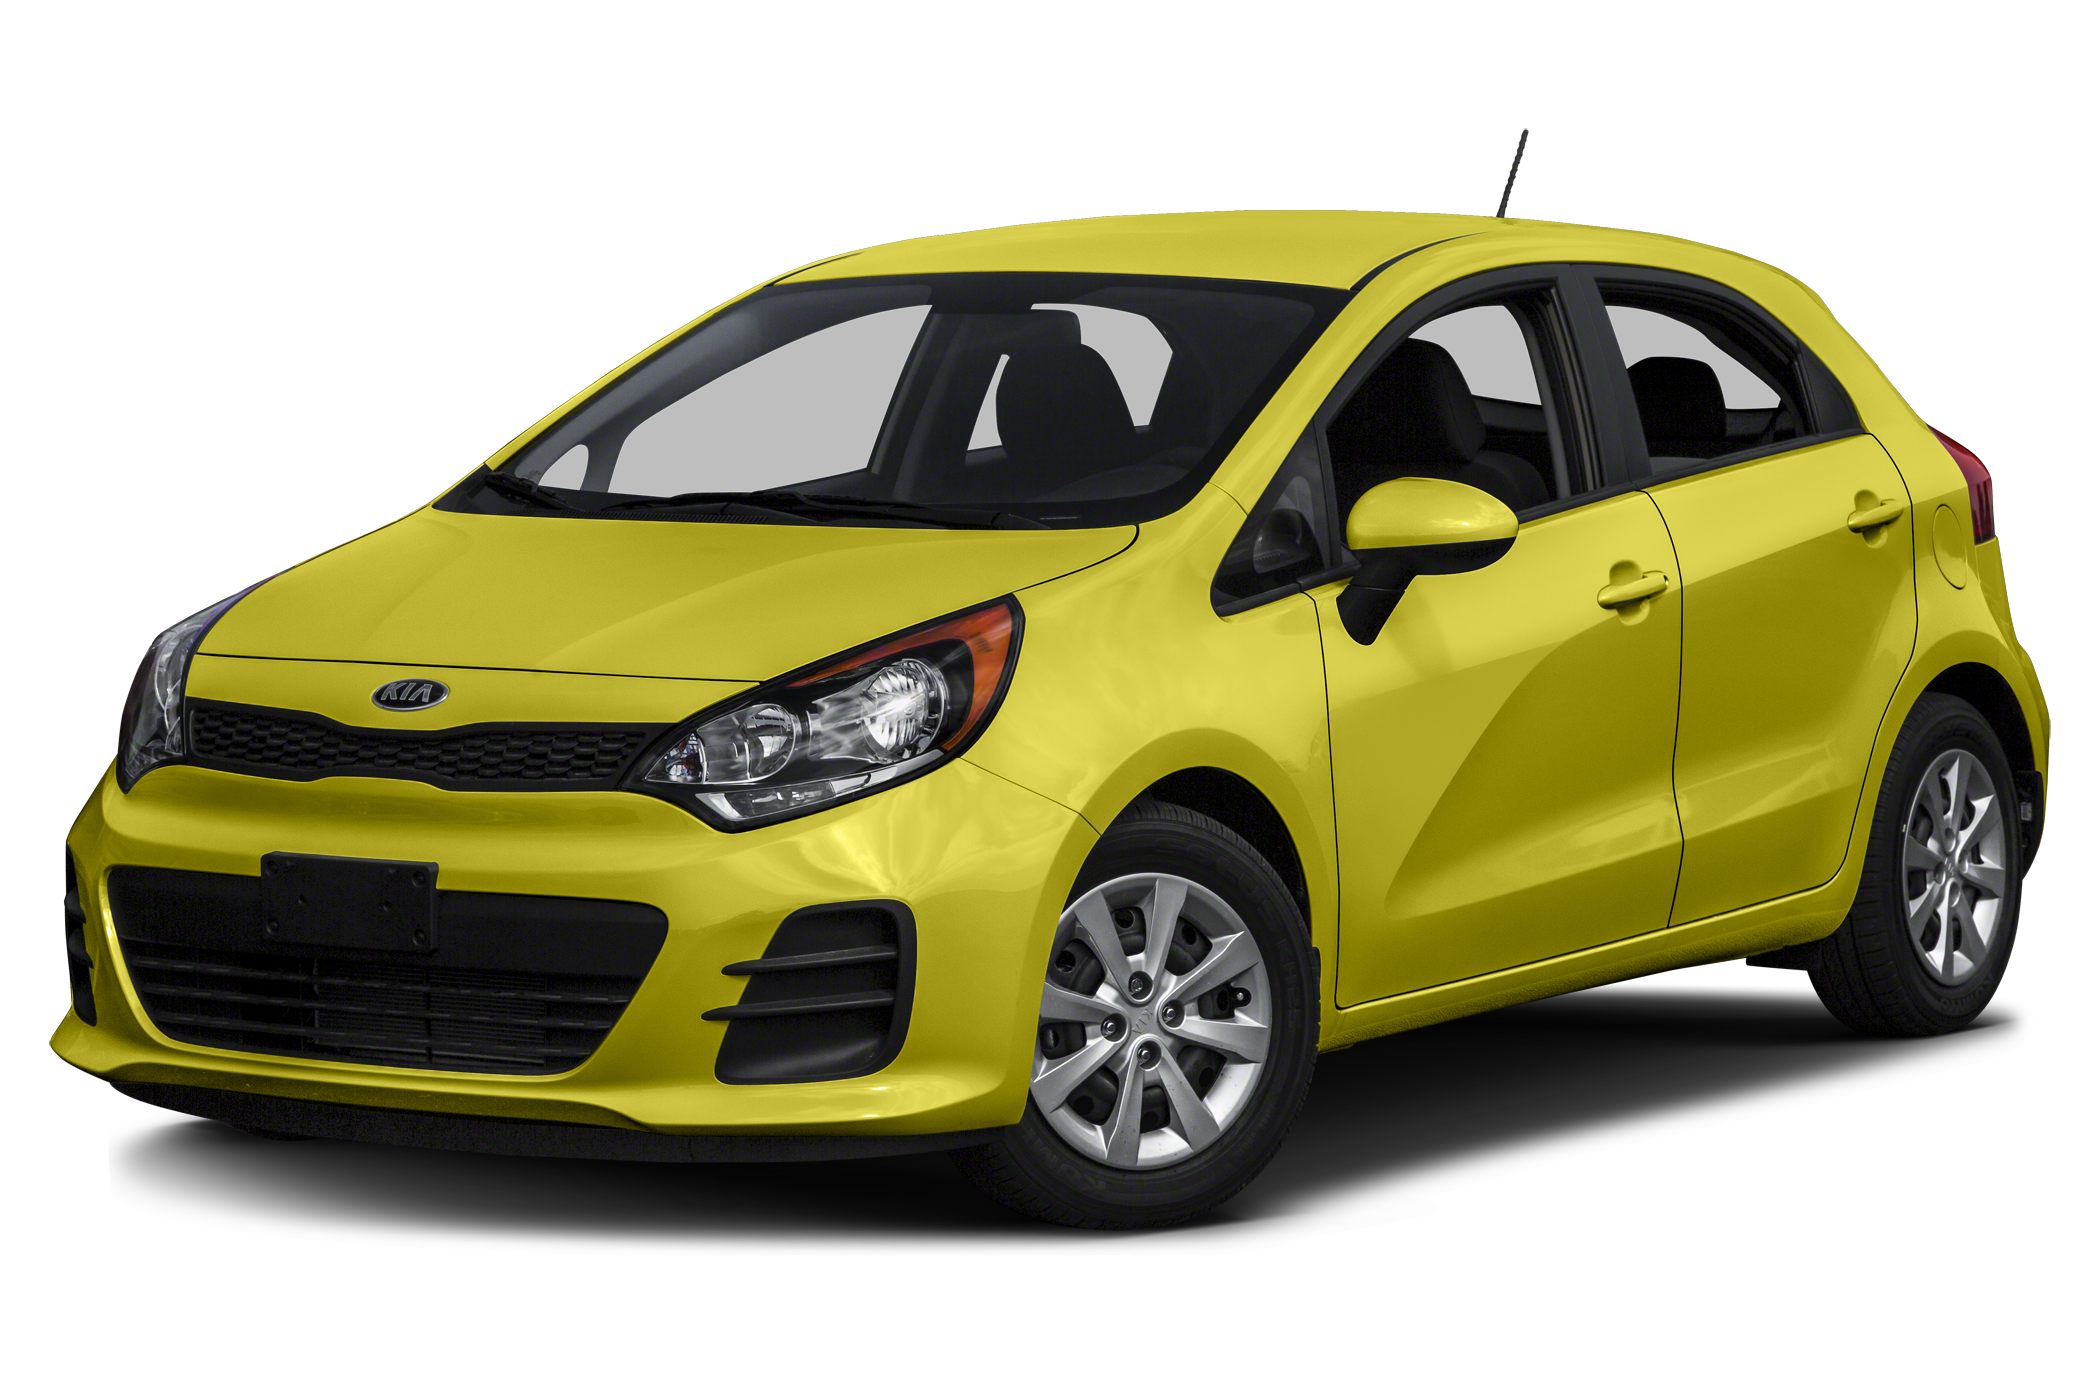 Great Deals on a new 2016 Kia Rio SX 4dr Hatchback at The Autoblog ...